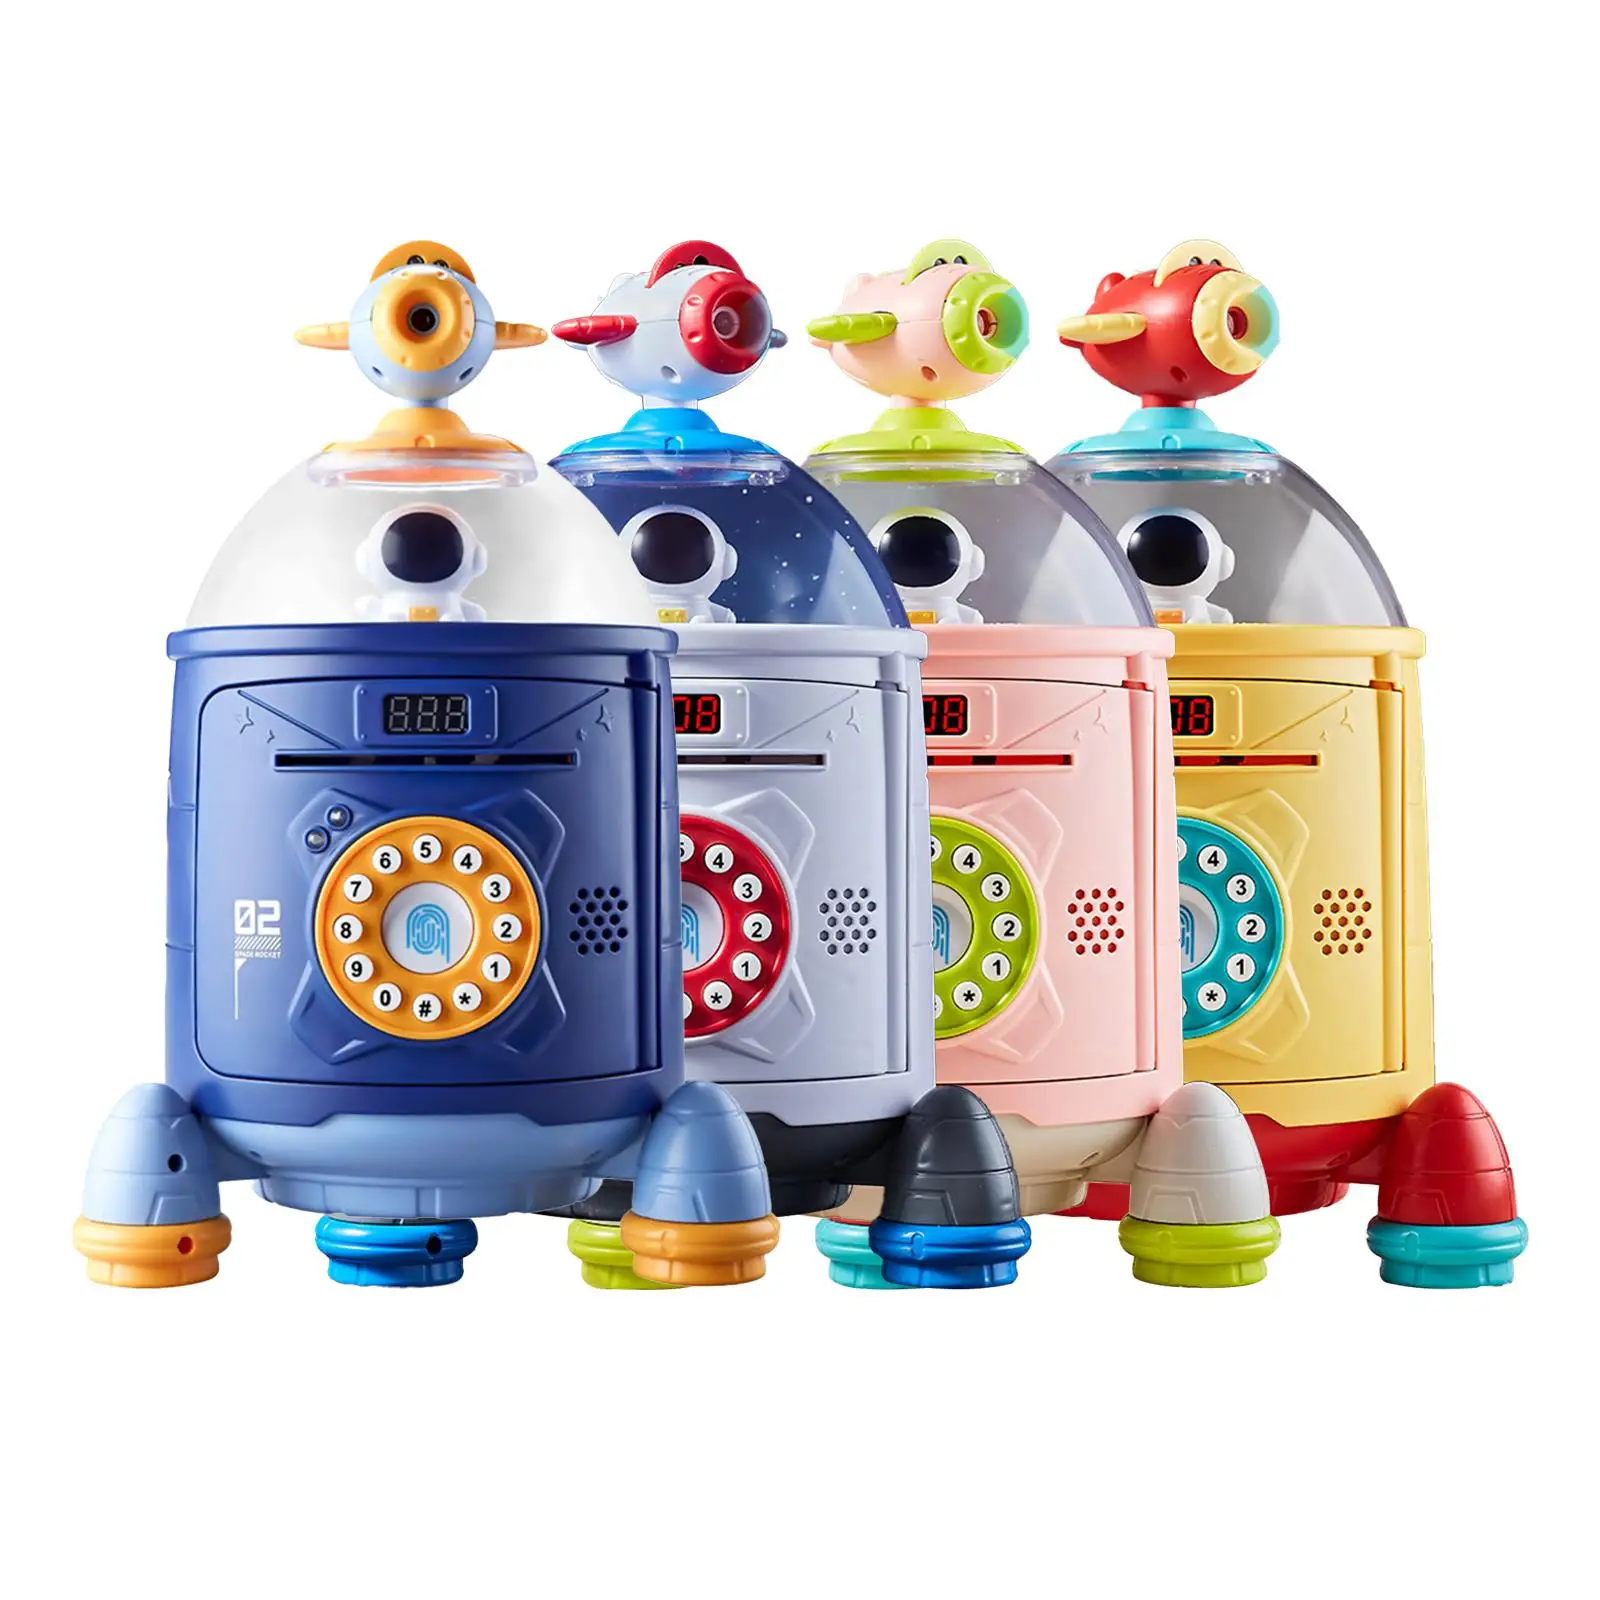 Rocket Piggy Bank Multifunction with Fingerprint and Password Code Lock Educational Toy Safe for Age 3-8 Years Kids Teens Adults